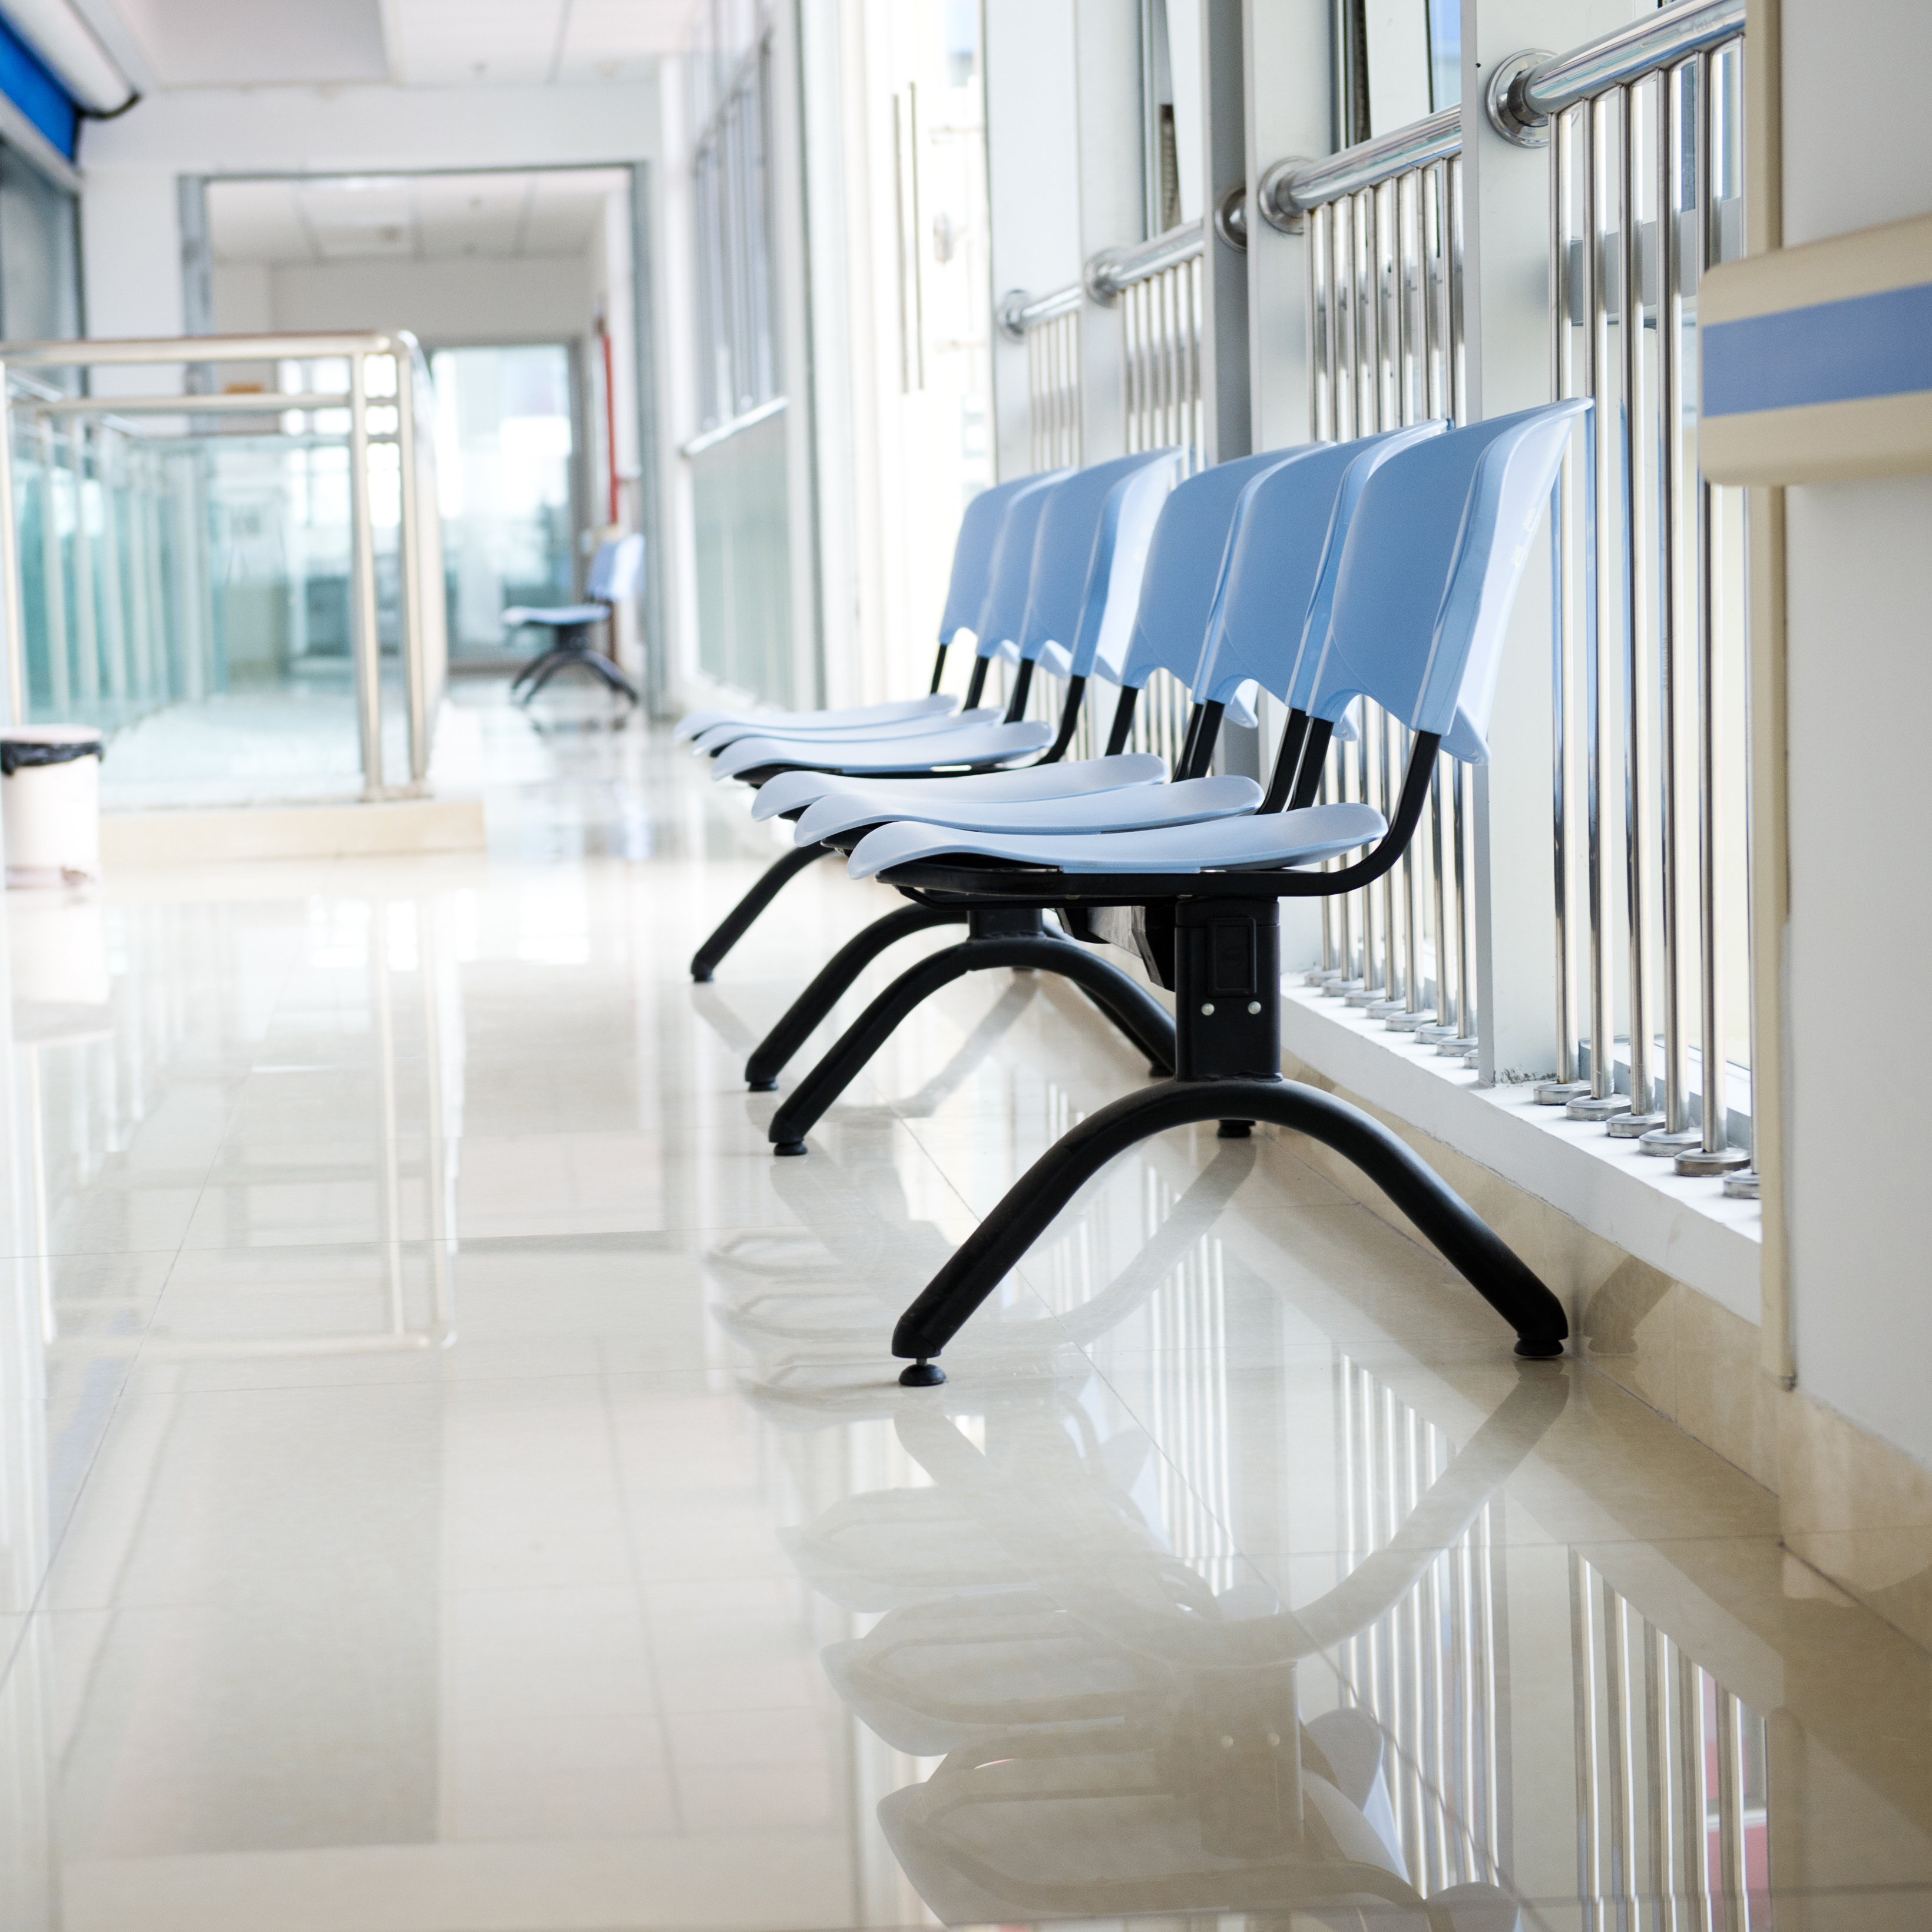 Chairs placed in a hospital hallway | Source: Shutterstock